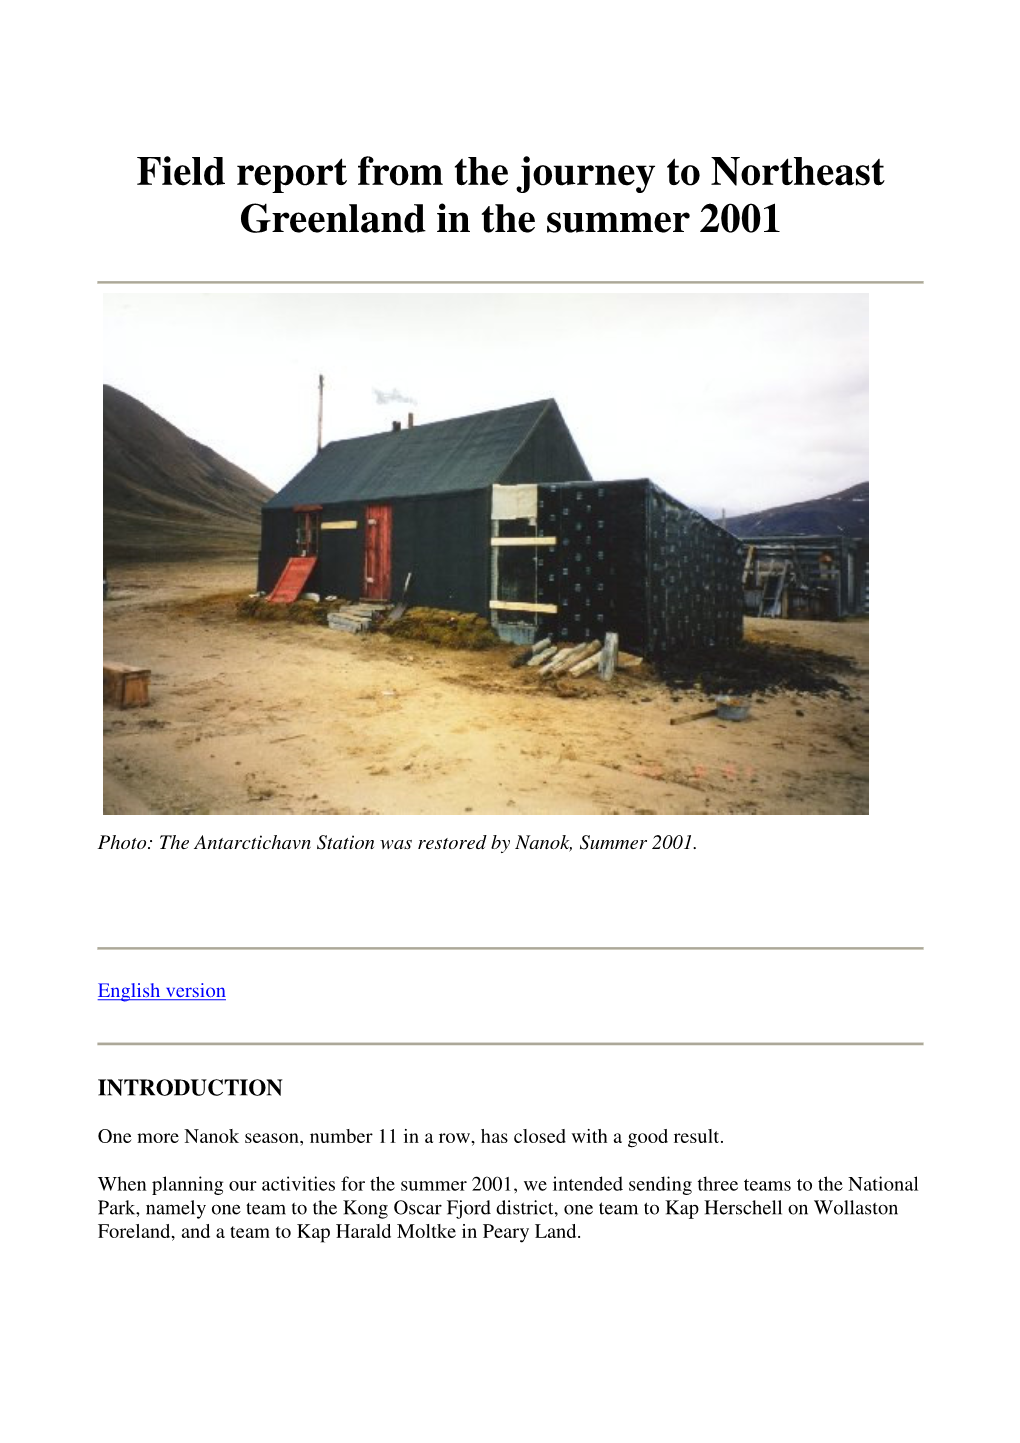 Field Report from the Journey to Northeast Greenland in the Summer 2001